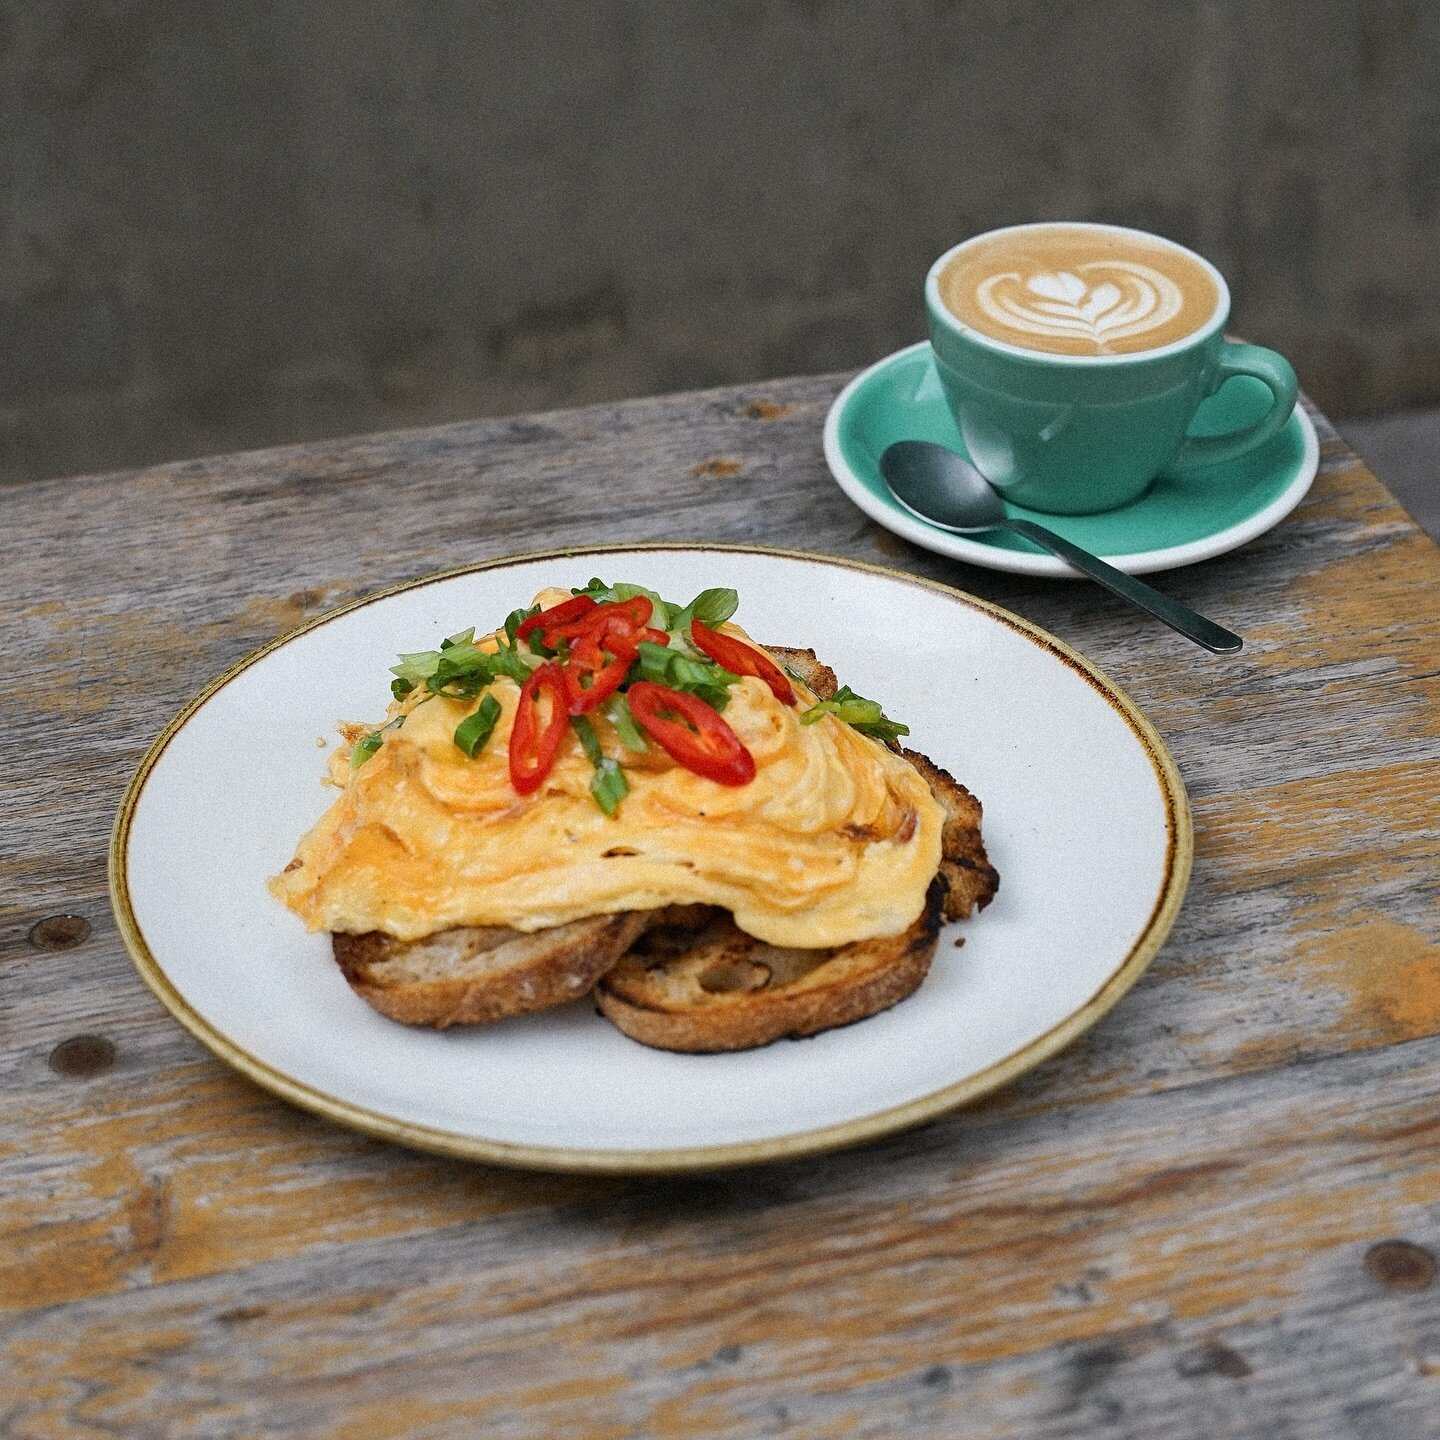 Chilli folded eggs on sourdough. It&rsquo;s nothing new or groundbreaking. It&rsquo;s simple. It&rsquo;s reliable. It doesn&rsquo;t try too hard, yet it&rsquo;s always a great way to start your day.